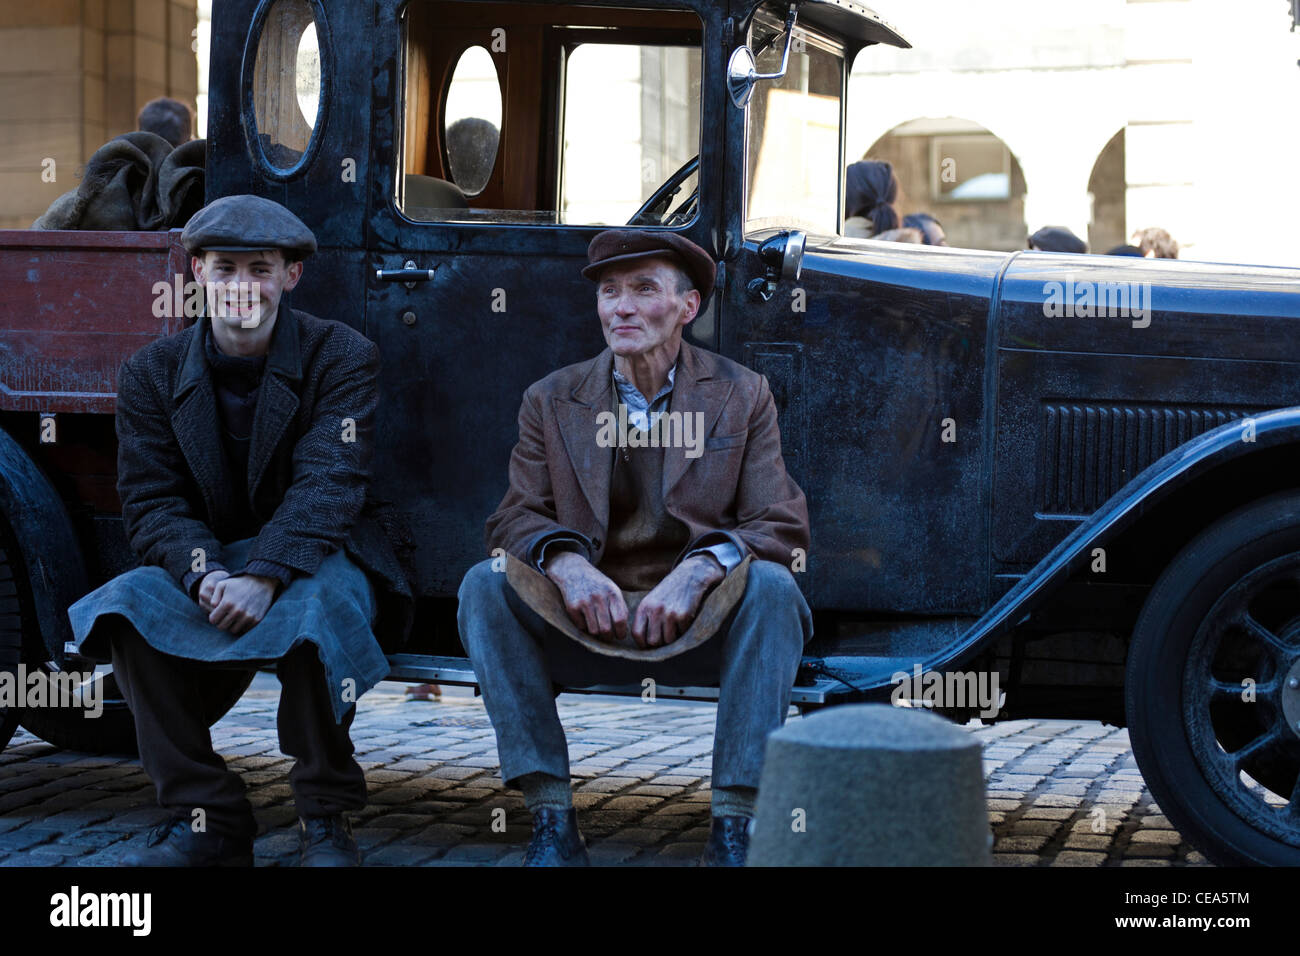 Man and boy in vintage outfits dressed as coalmen sitting on step of old fashioned truck Edinburgh Scotland UK Stock Photo